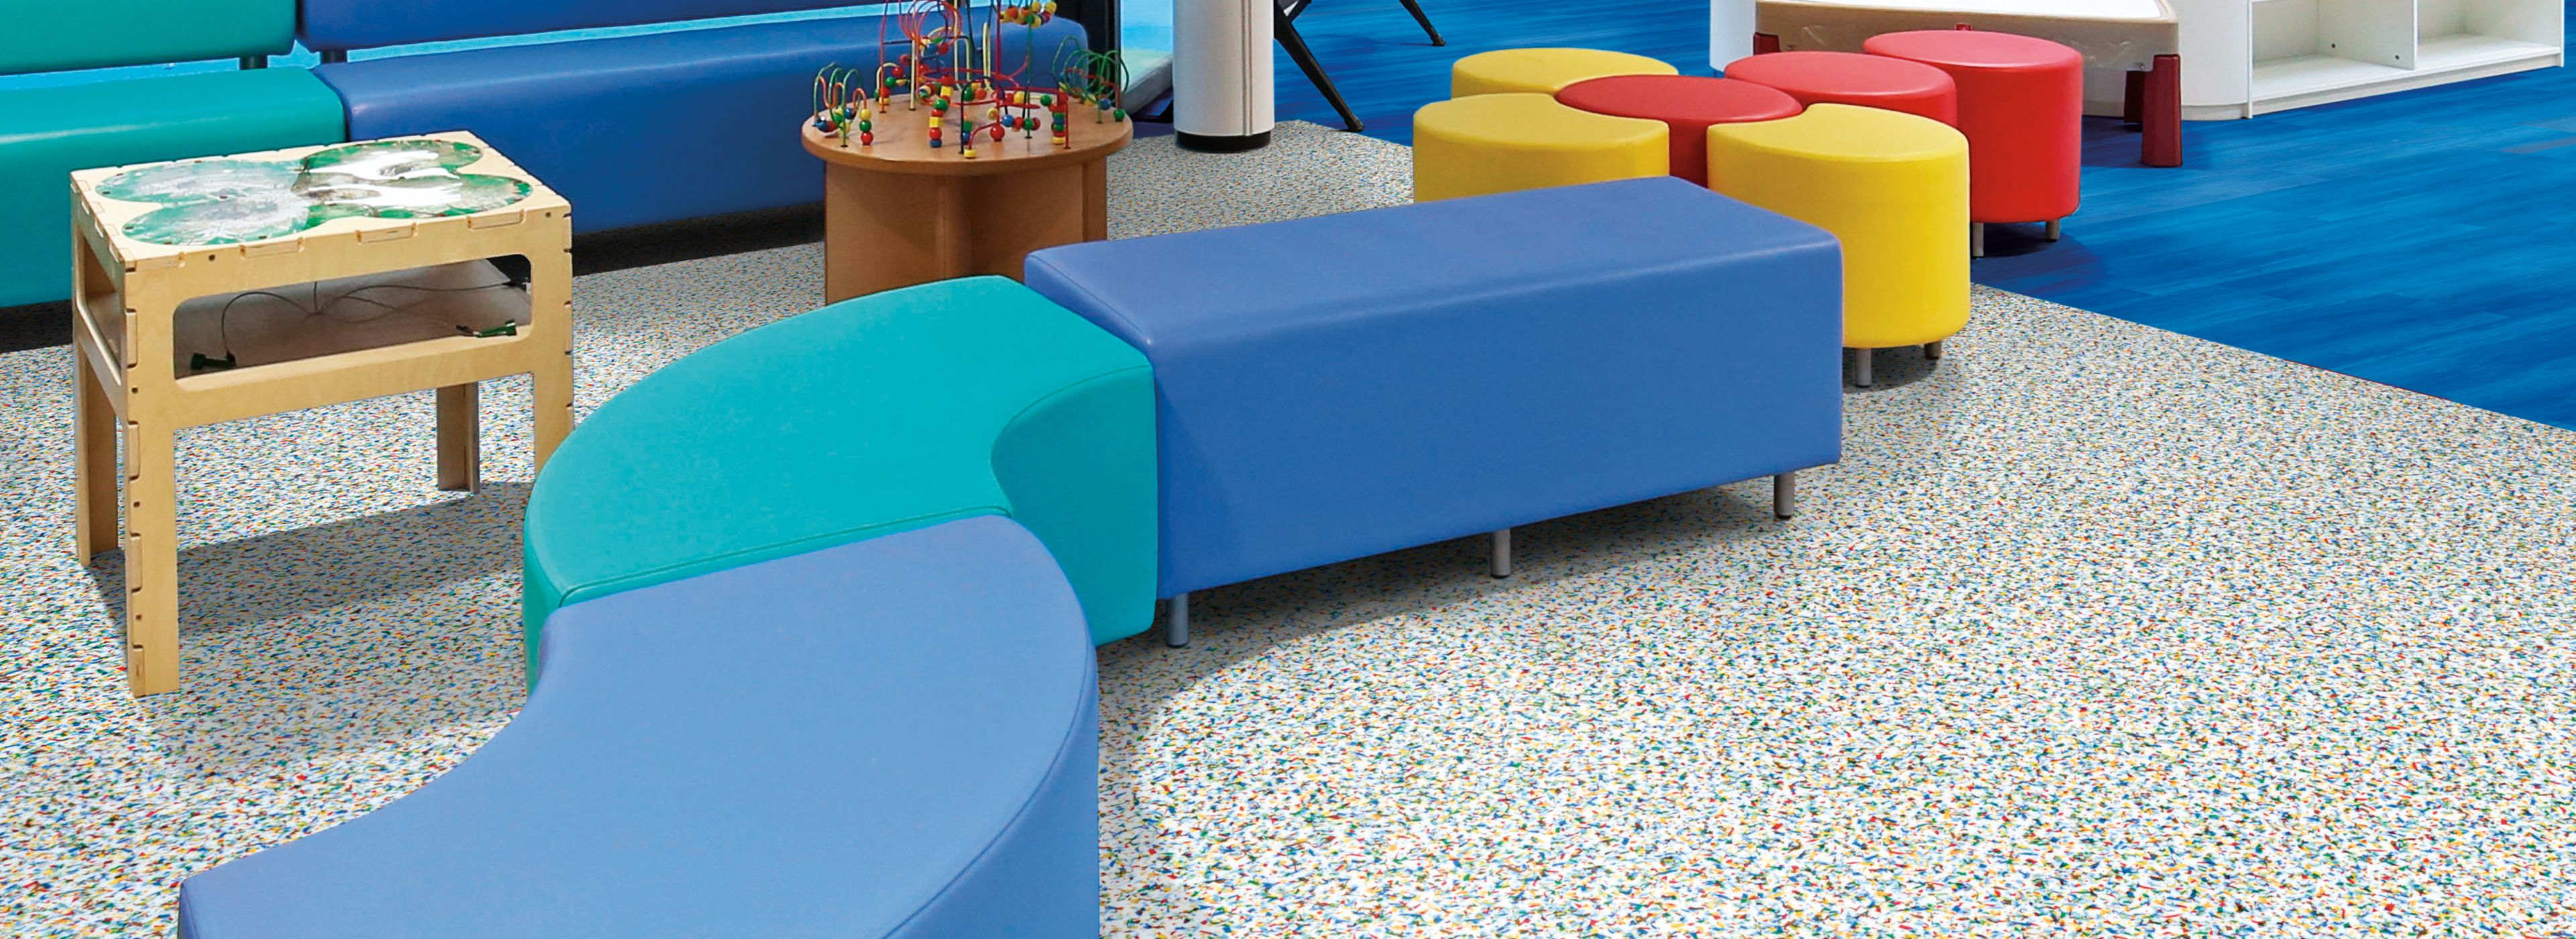 Interface Walk on By and Studio Set LVT in children's waiting area with colorful furniture image number 1